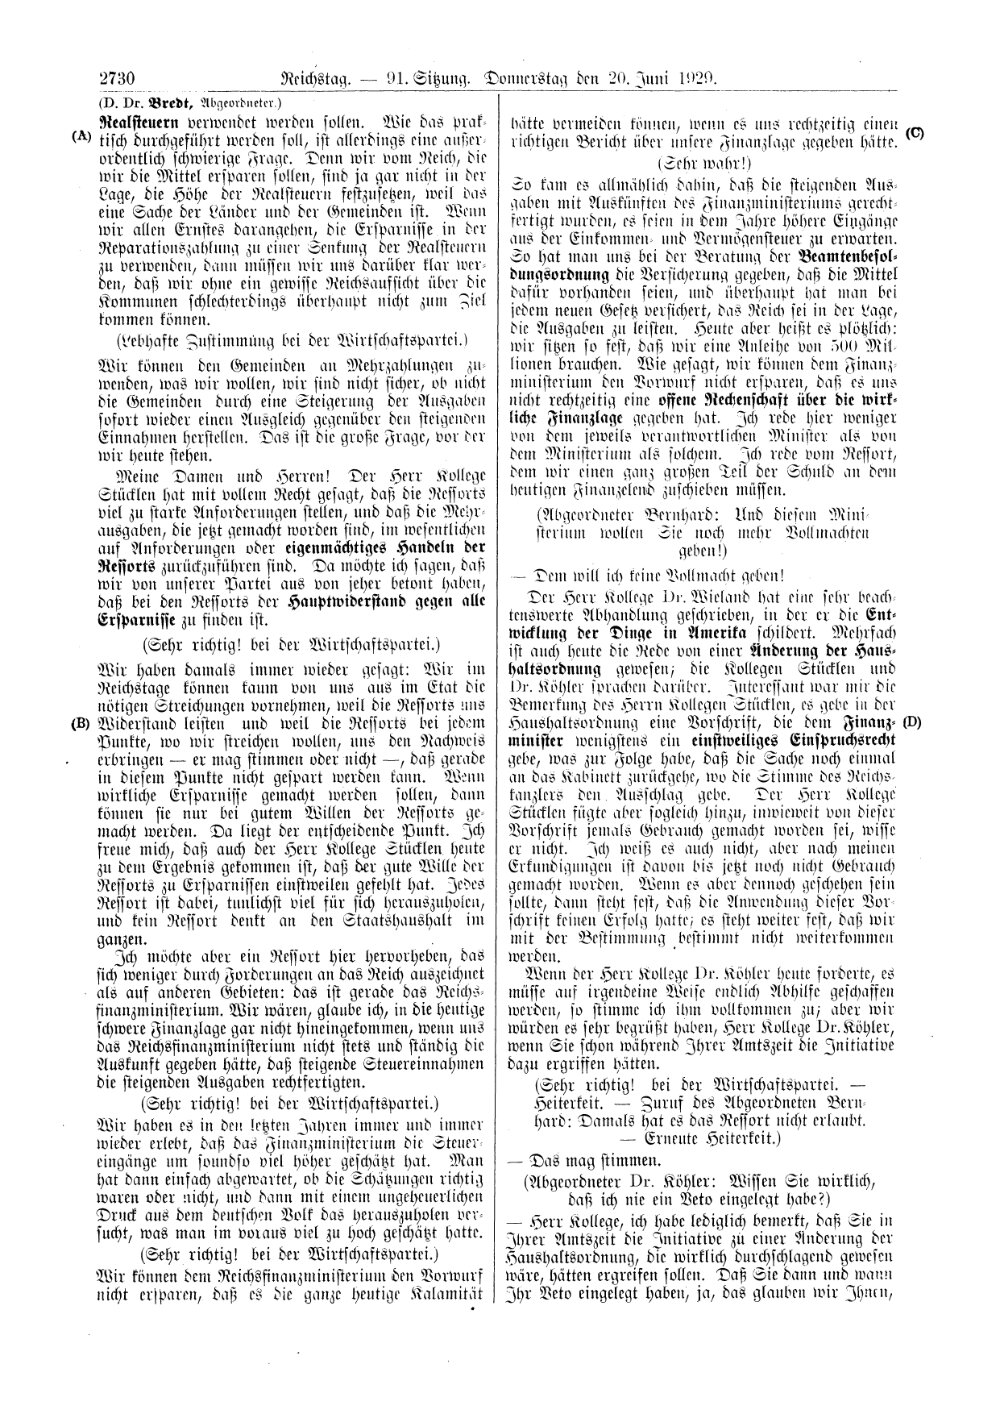 Scan of page 2730